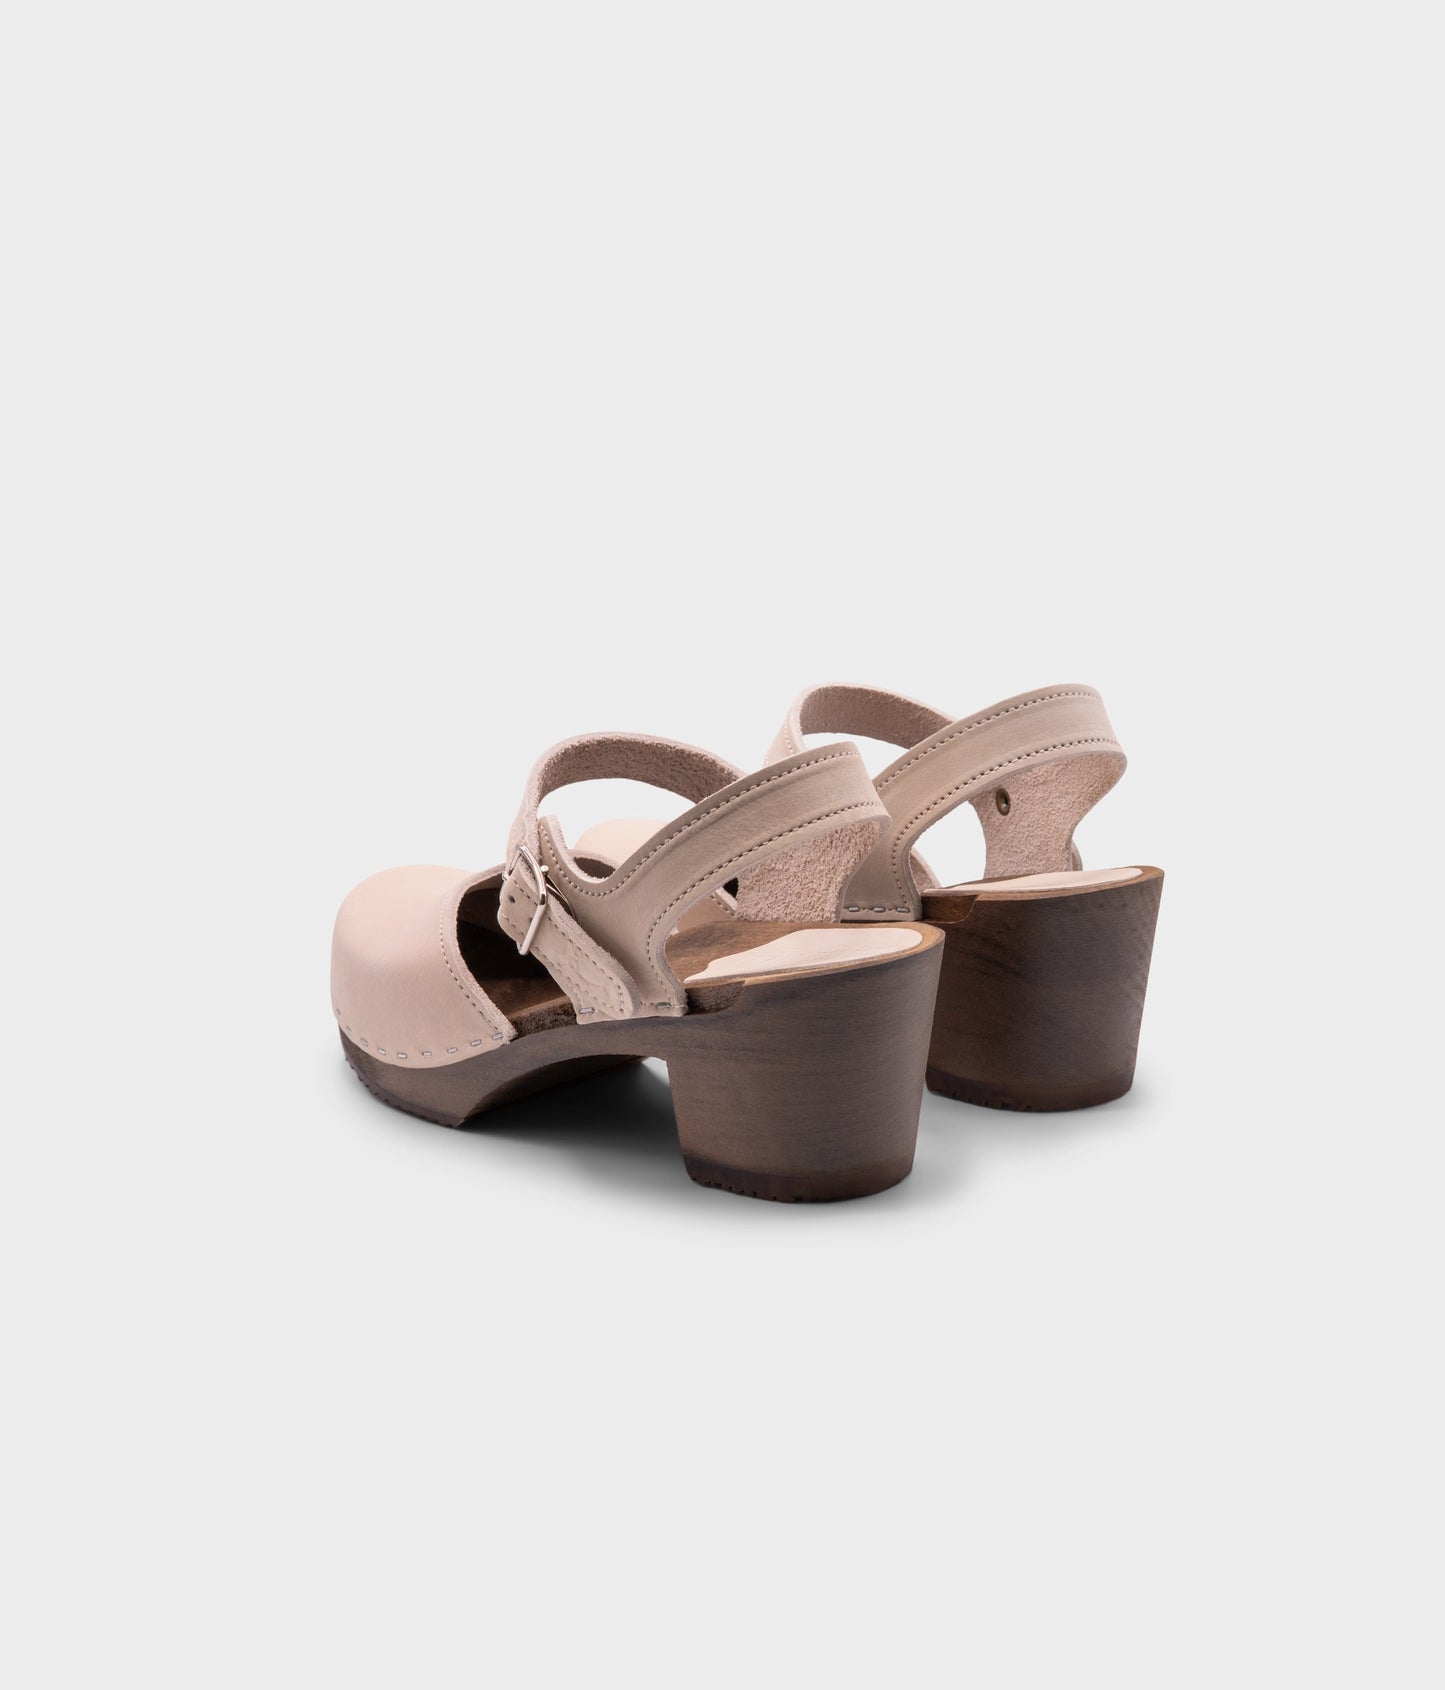 high heeled closed-toe clog sandal in sand white nubuck leather stapled on a dark wooden base